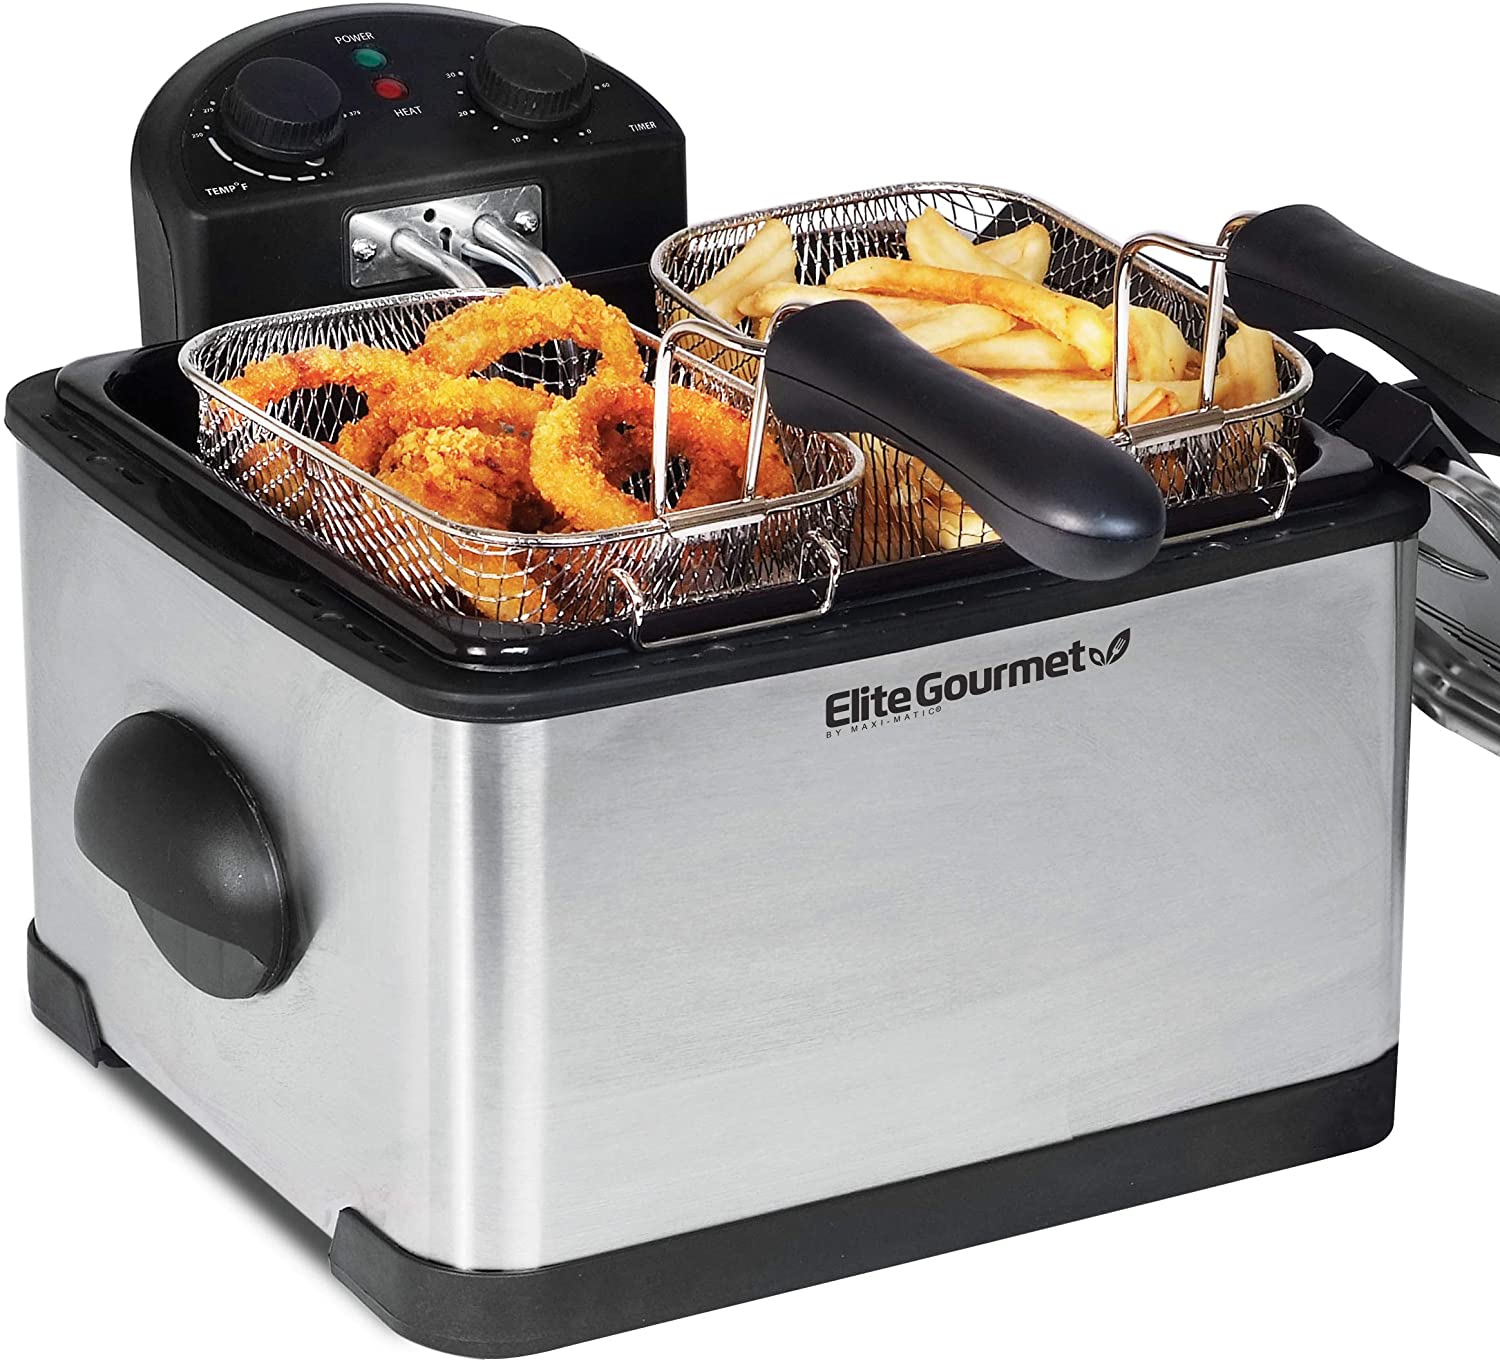 T-fal Deep Fryer with Basket, Stainless Steel, Easy to Clean Deep Fryer,  Oil Filtration, 2.6-Pound, Silver, Model FR8000 MSRP $114.99 Auction